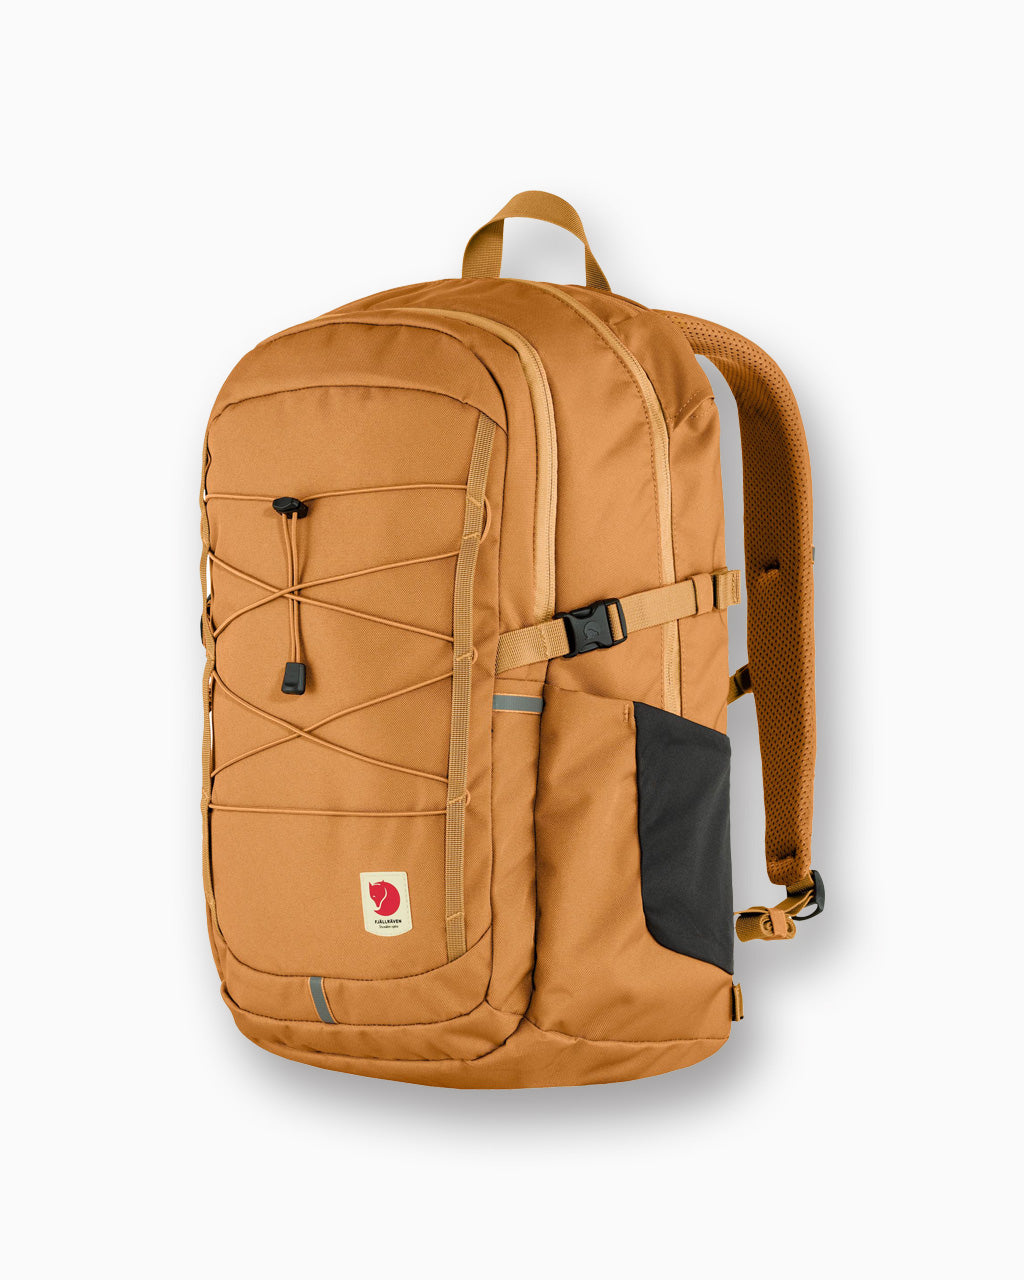 Front view of the Fjallraven SKULE 28 Backpack